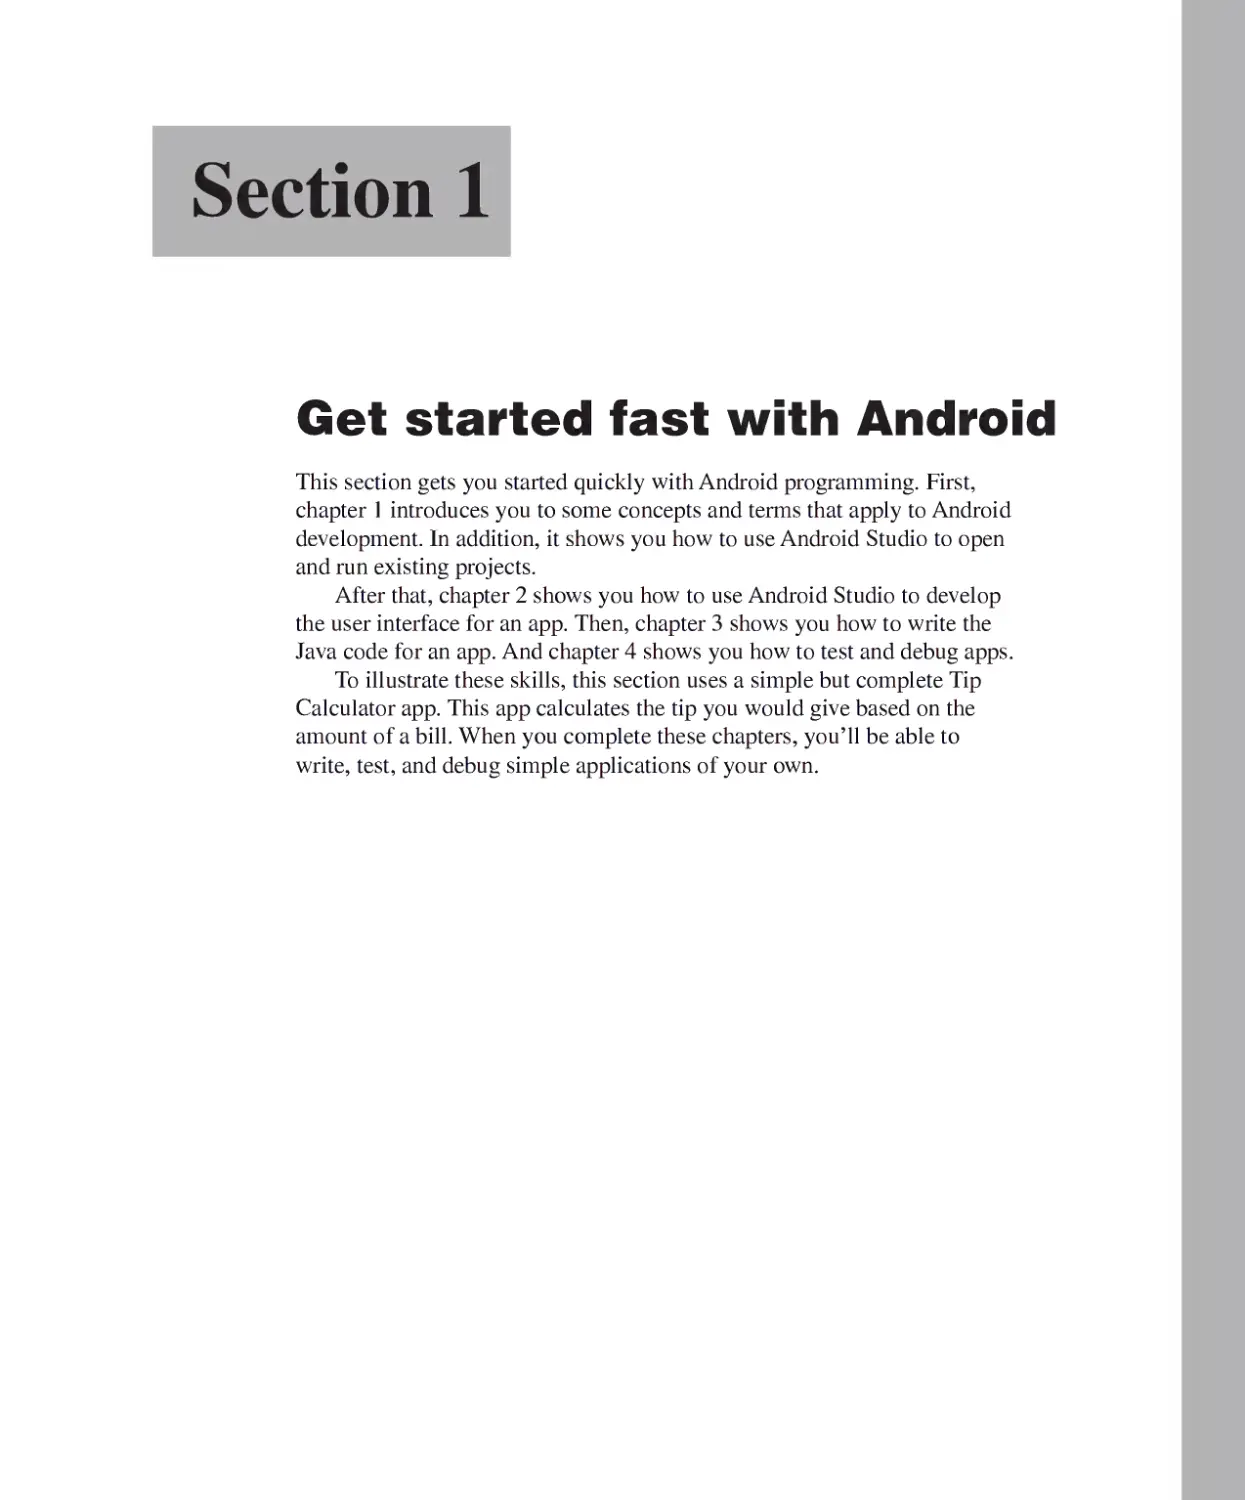 Section 1 - Get Started Fast with Android